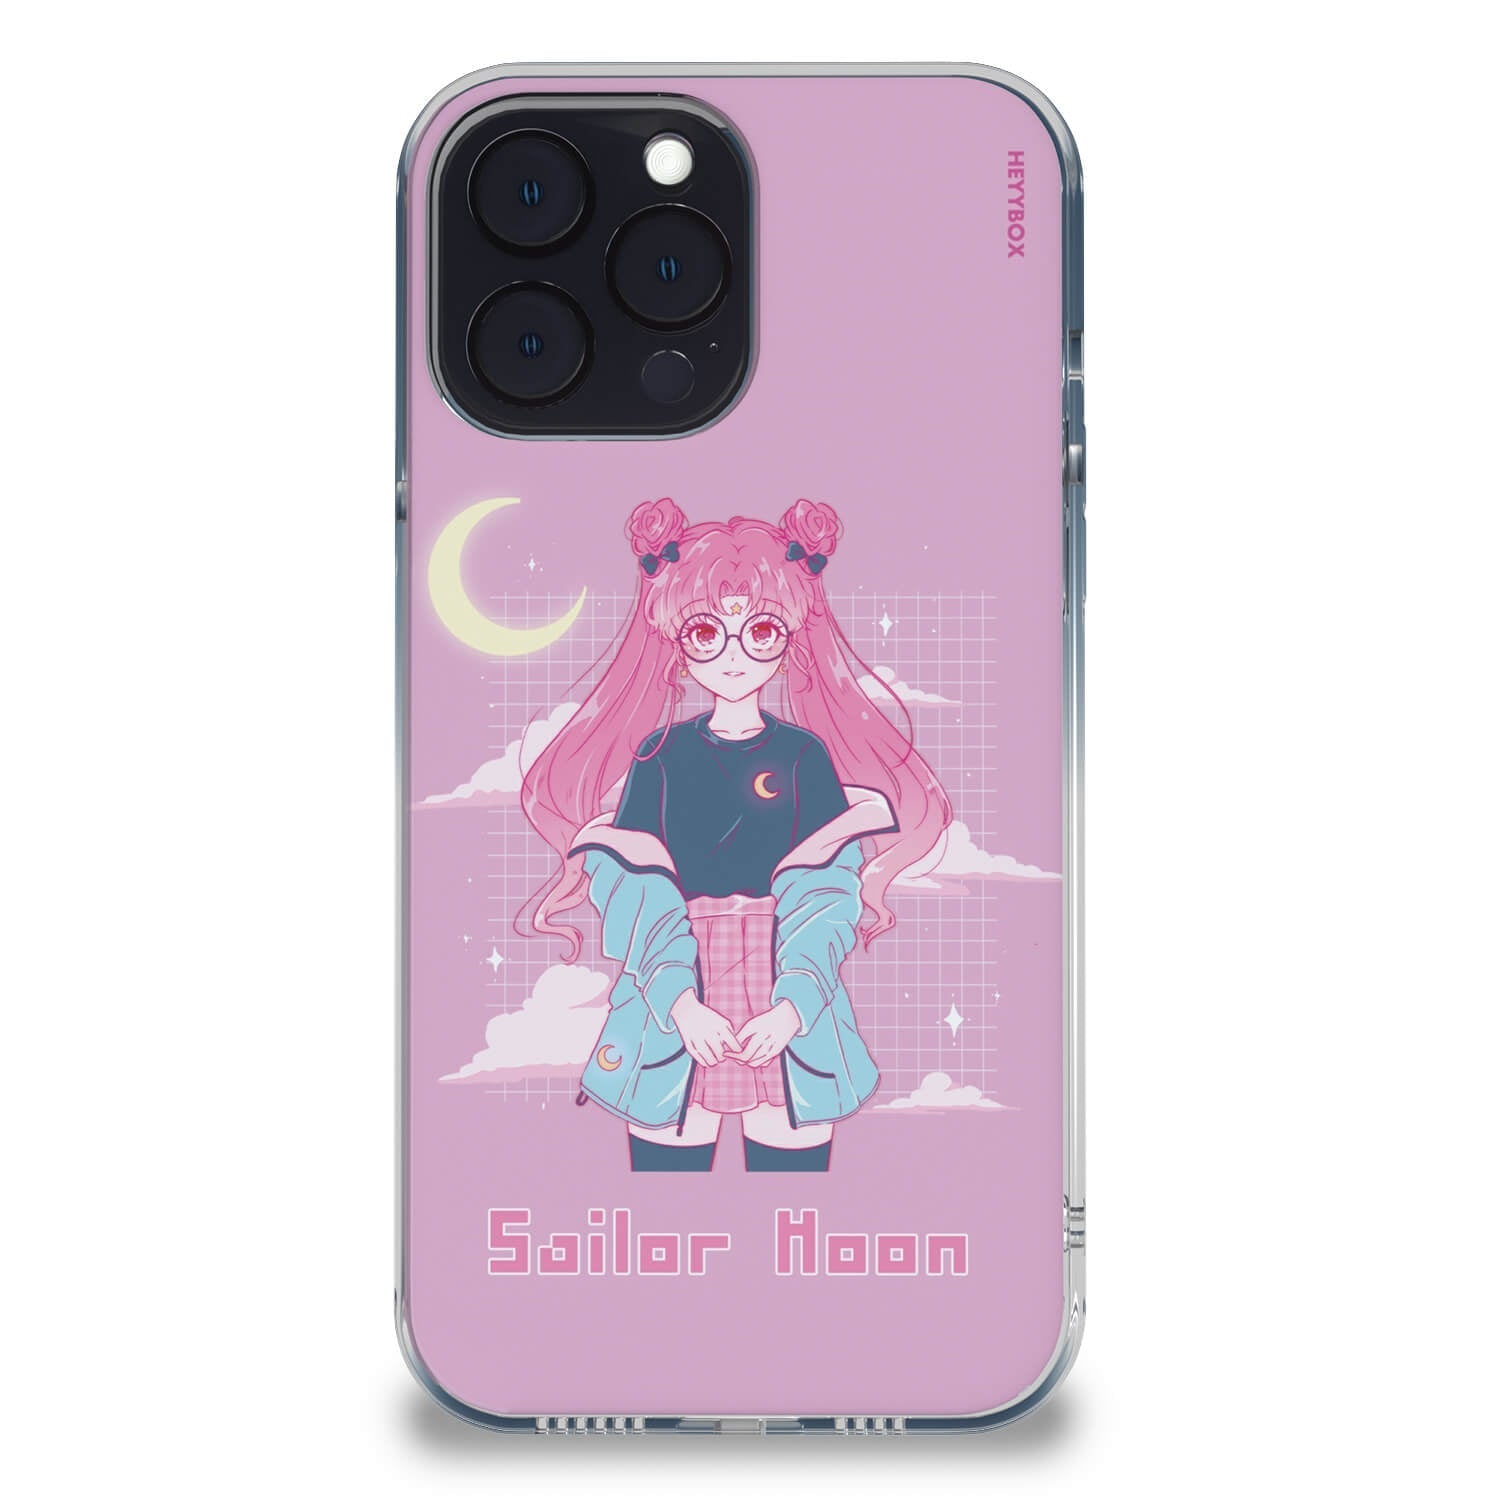 Sailor Moon with Pink Hair RGB Case for iPhone